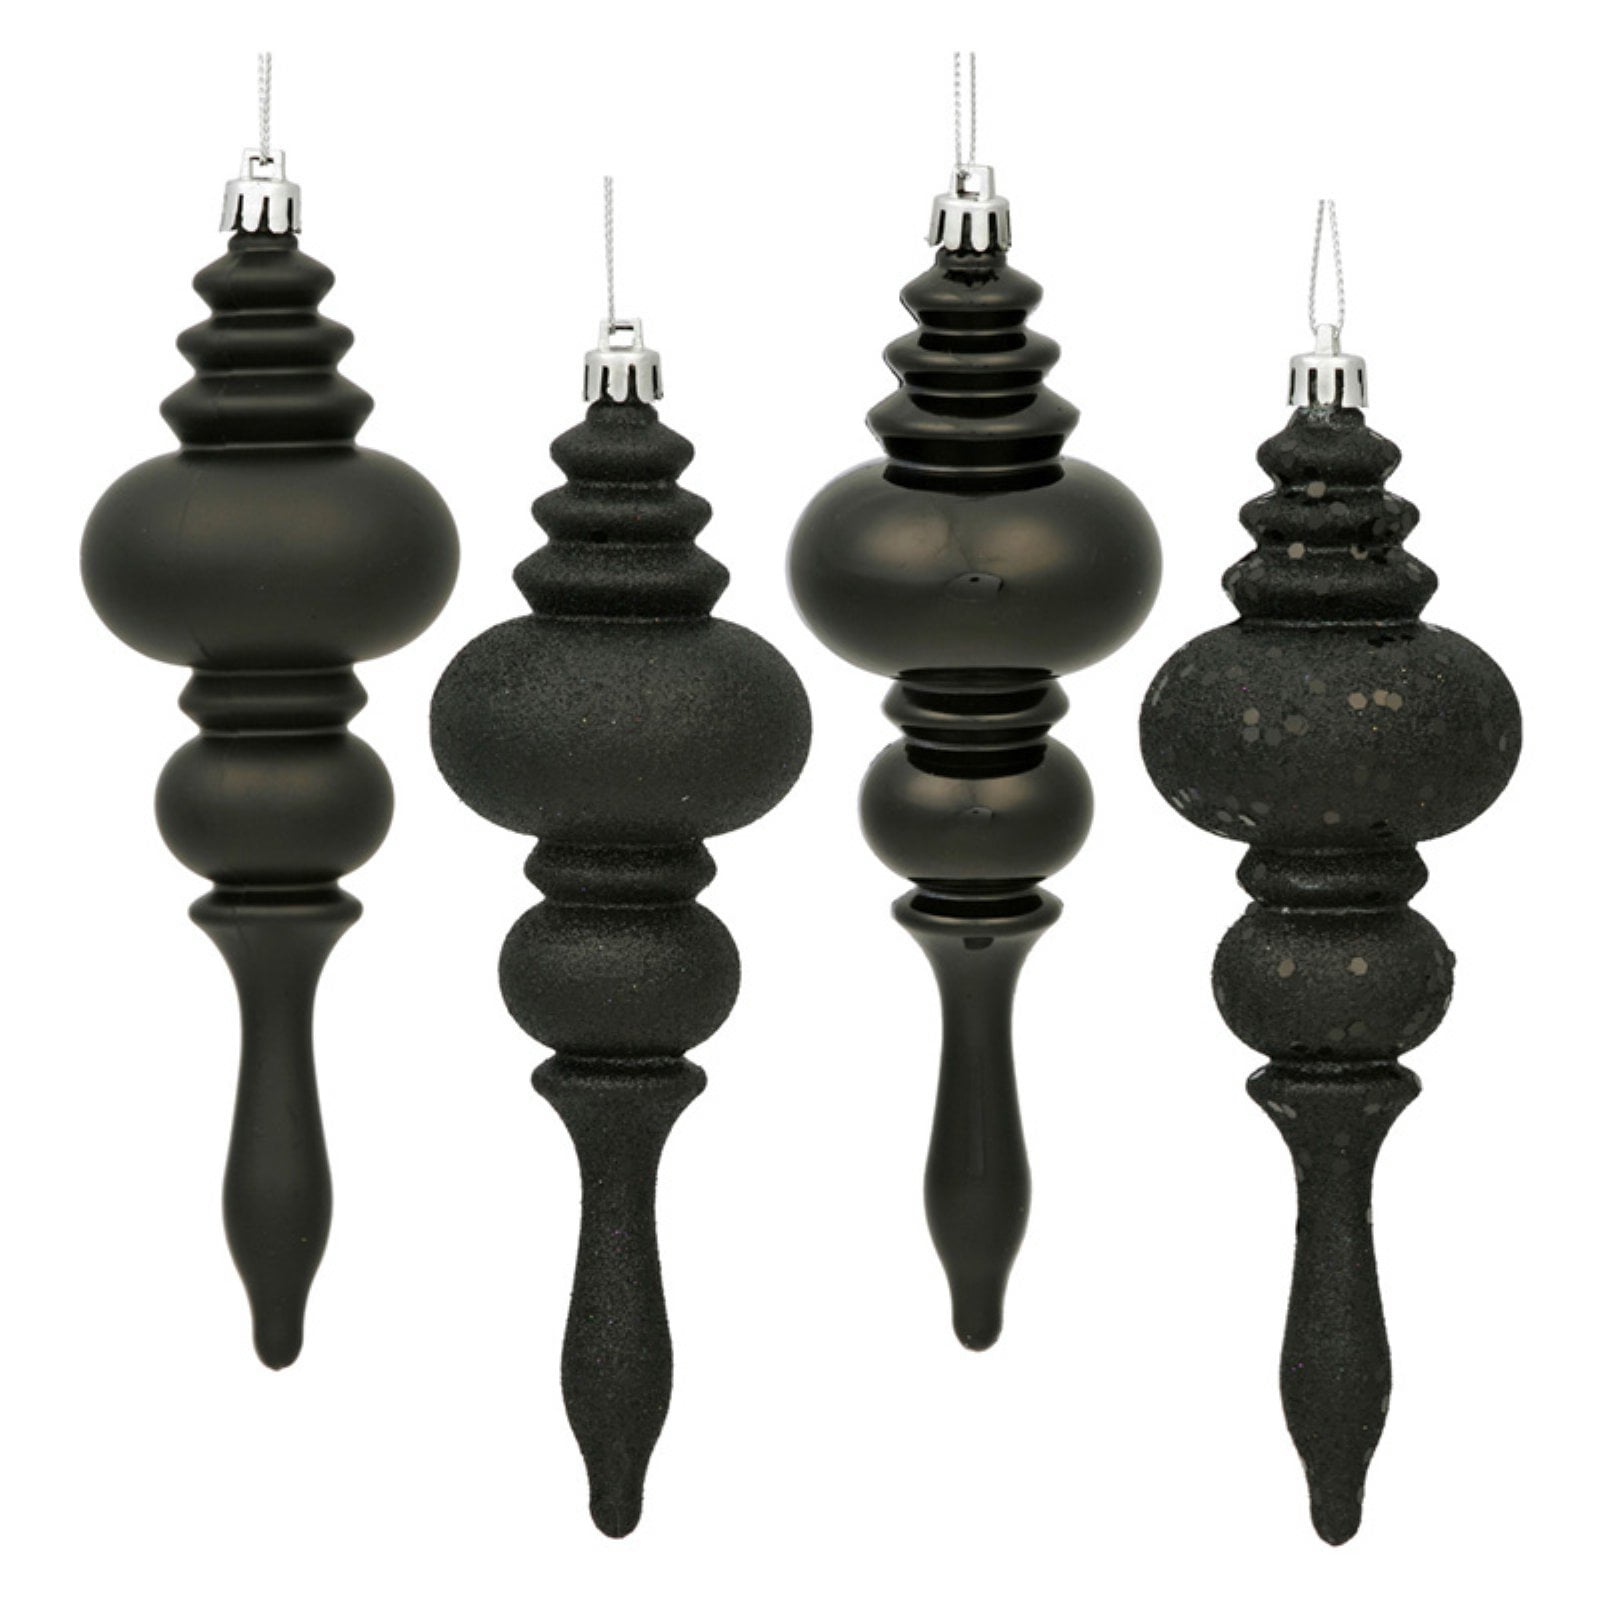 Sullivans 8 in. 8.75 in. and 7.5 in. Black Finial Ornament - Set of 3, Black Christmas Ornaments